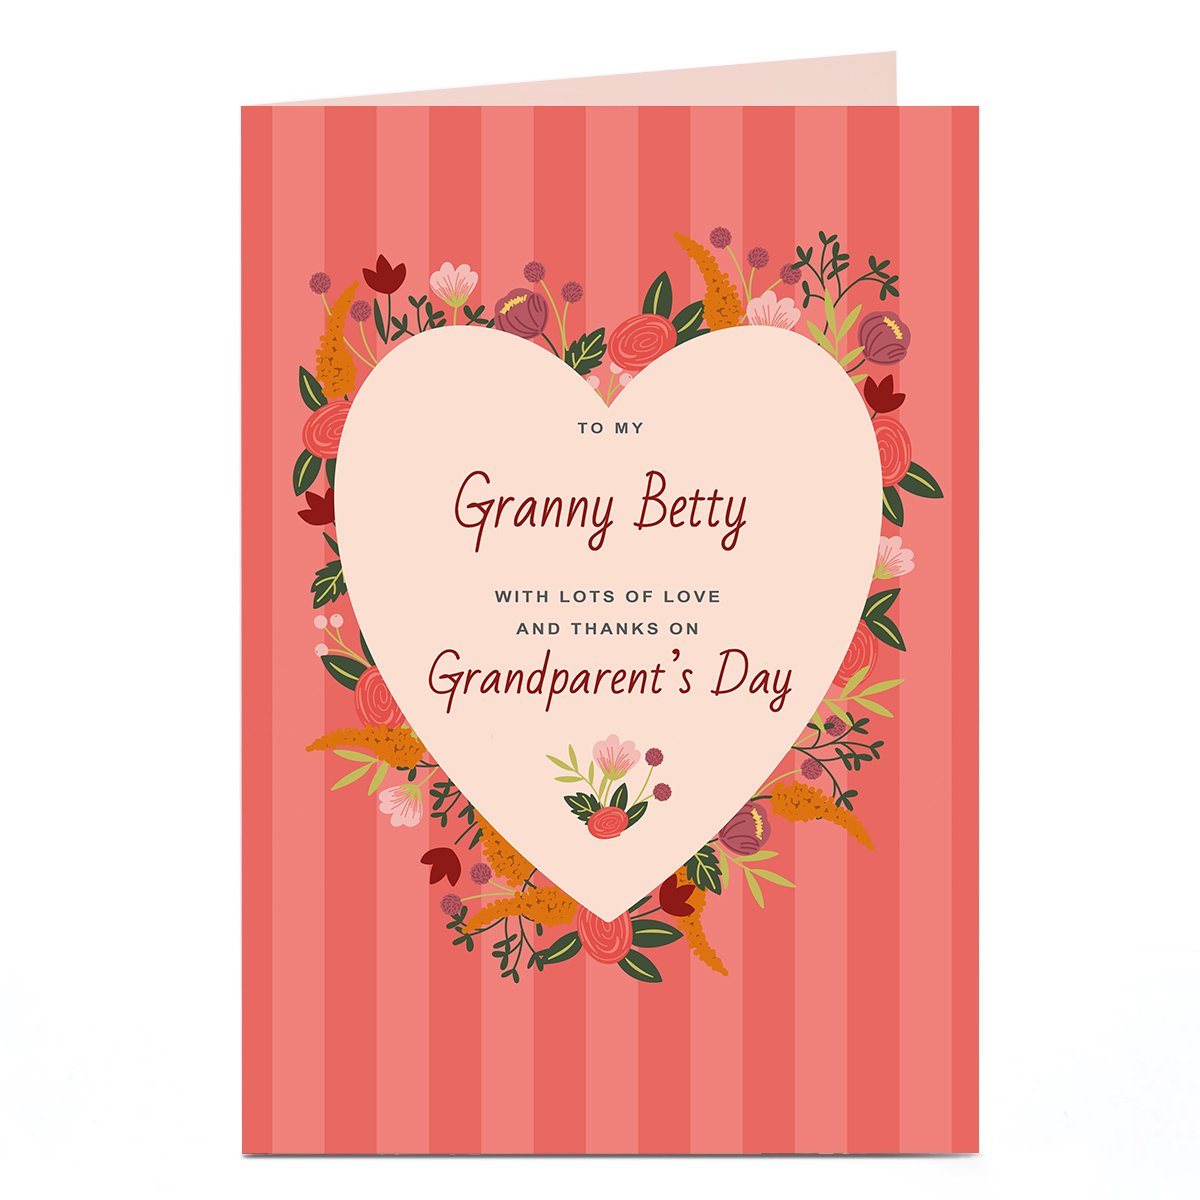 Photo Grandparent's Day Card - Heart & Flowers